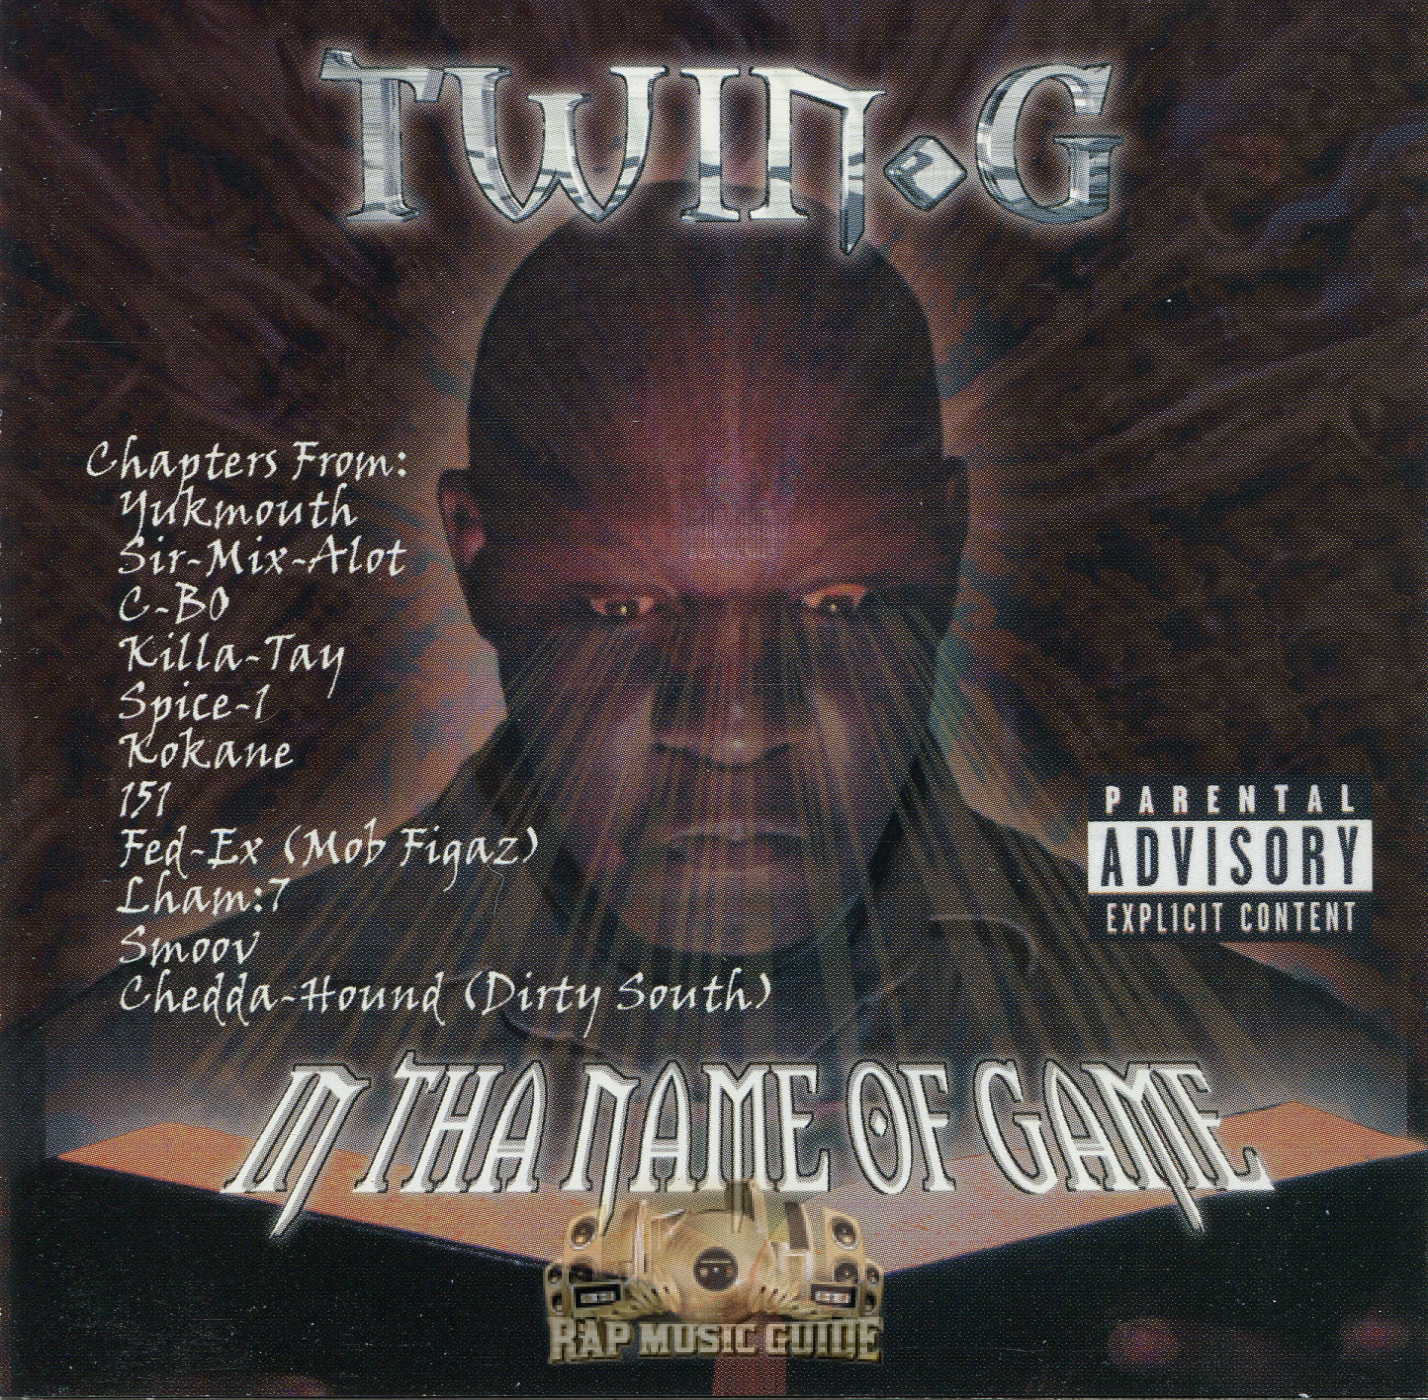 Twin-G - In Tha Name Of Game: CD | Rap Music Guide